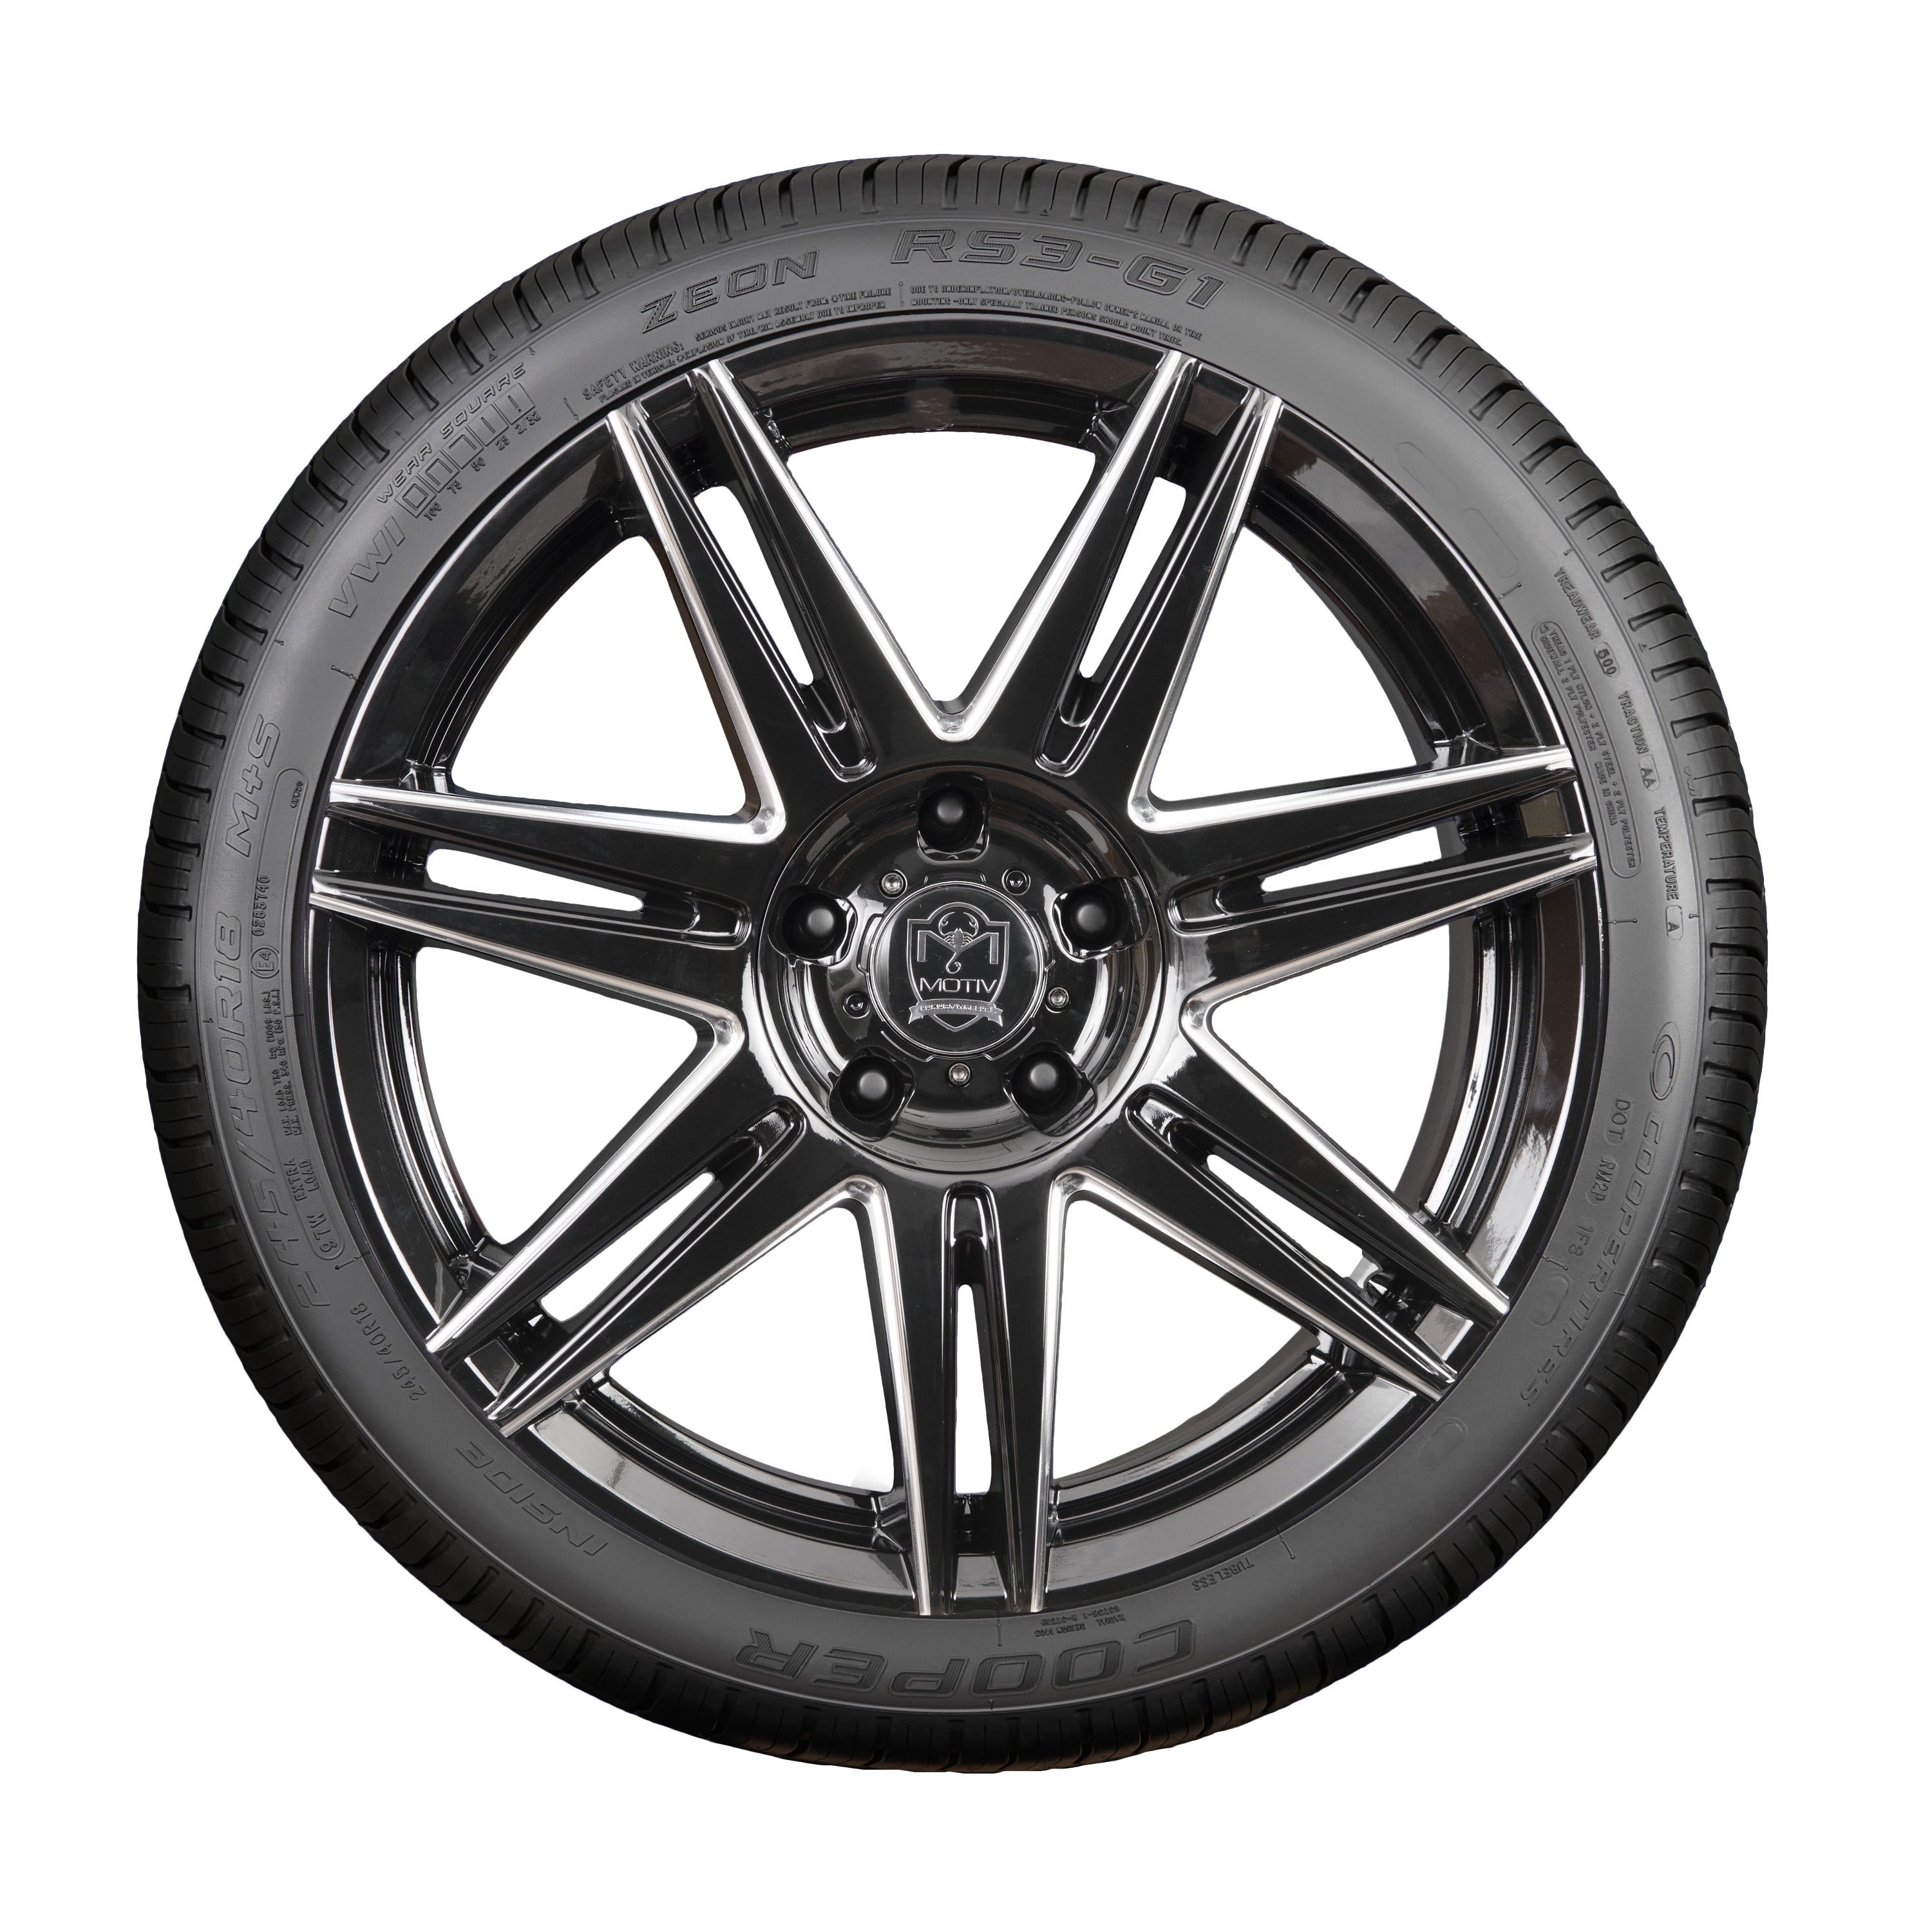 Cooper Car & Truck Tires Auto Parts and Vehicles New Cooper Zeon RS3-G1